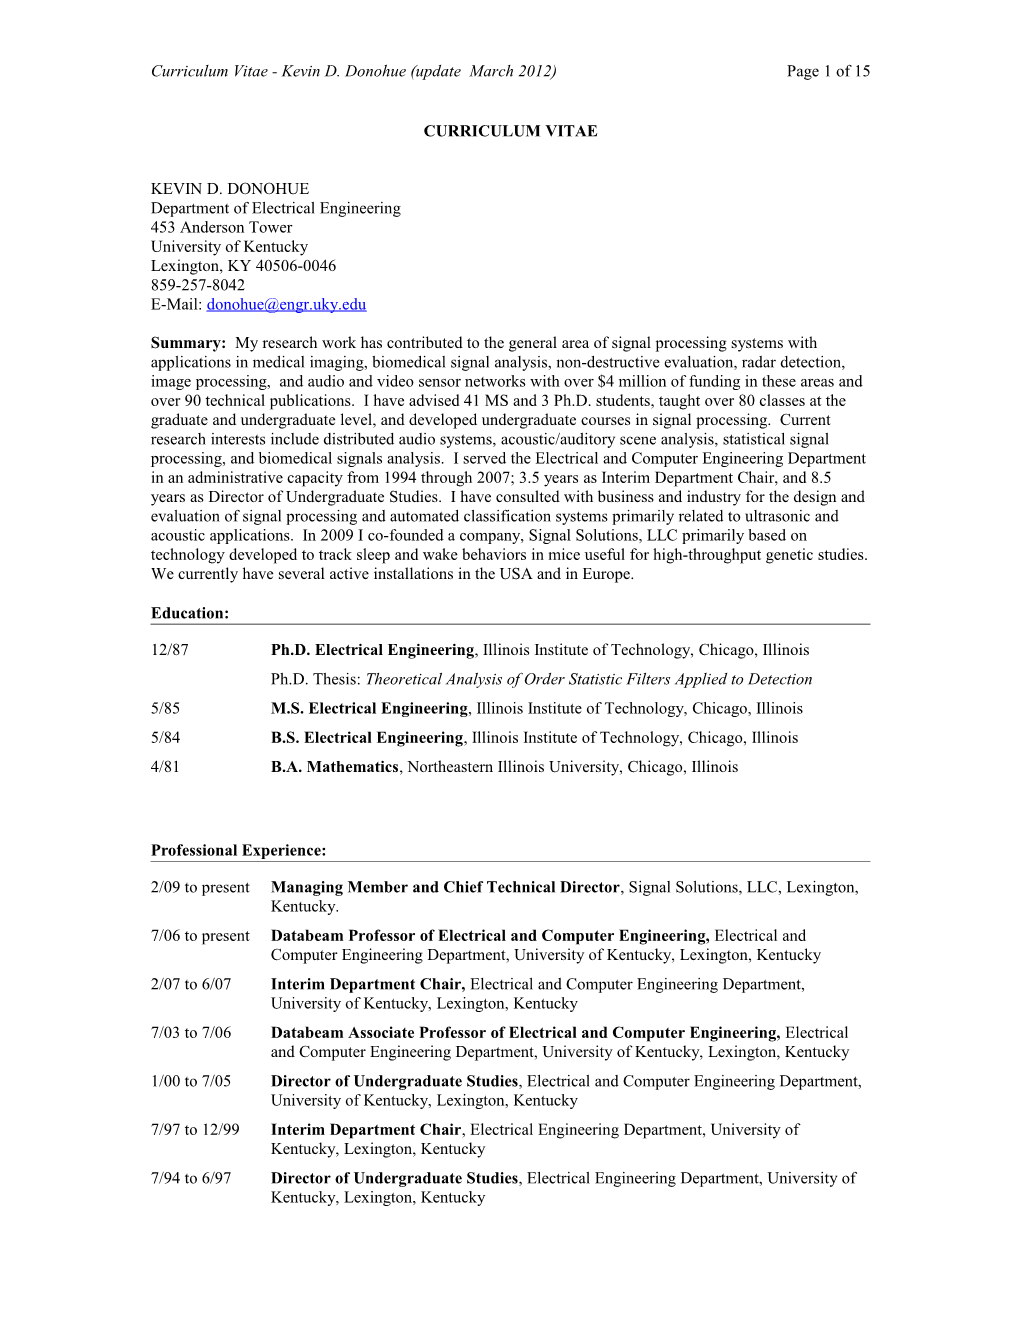 Curriculum Vitae - Kevin D. Donohue (Update March 2012) Page 1 of 1